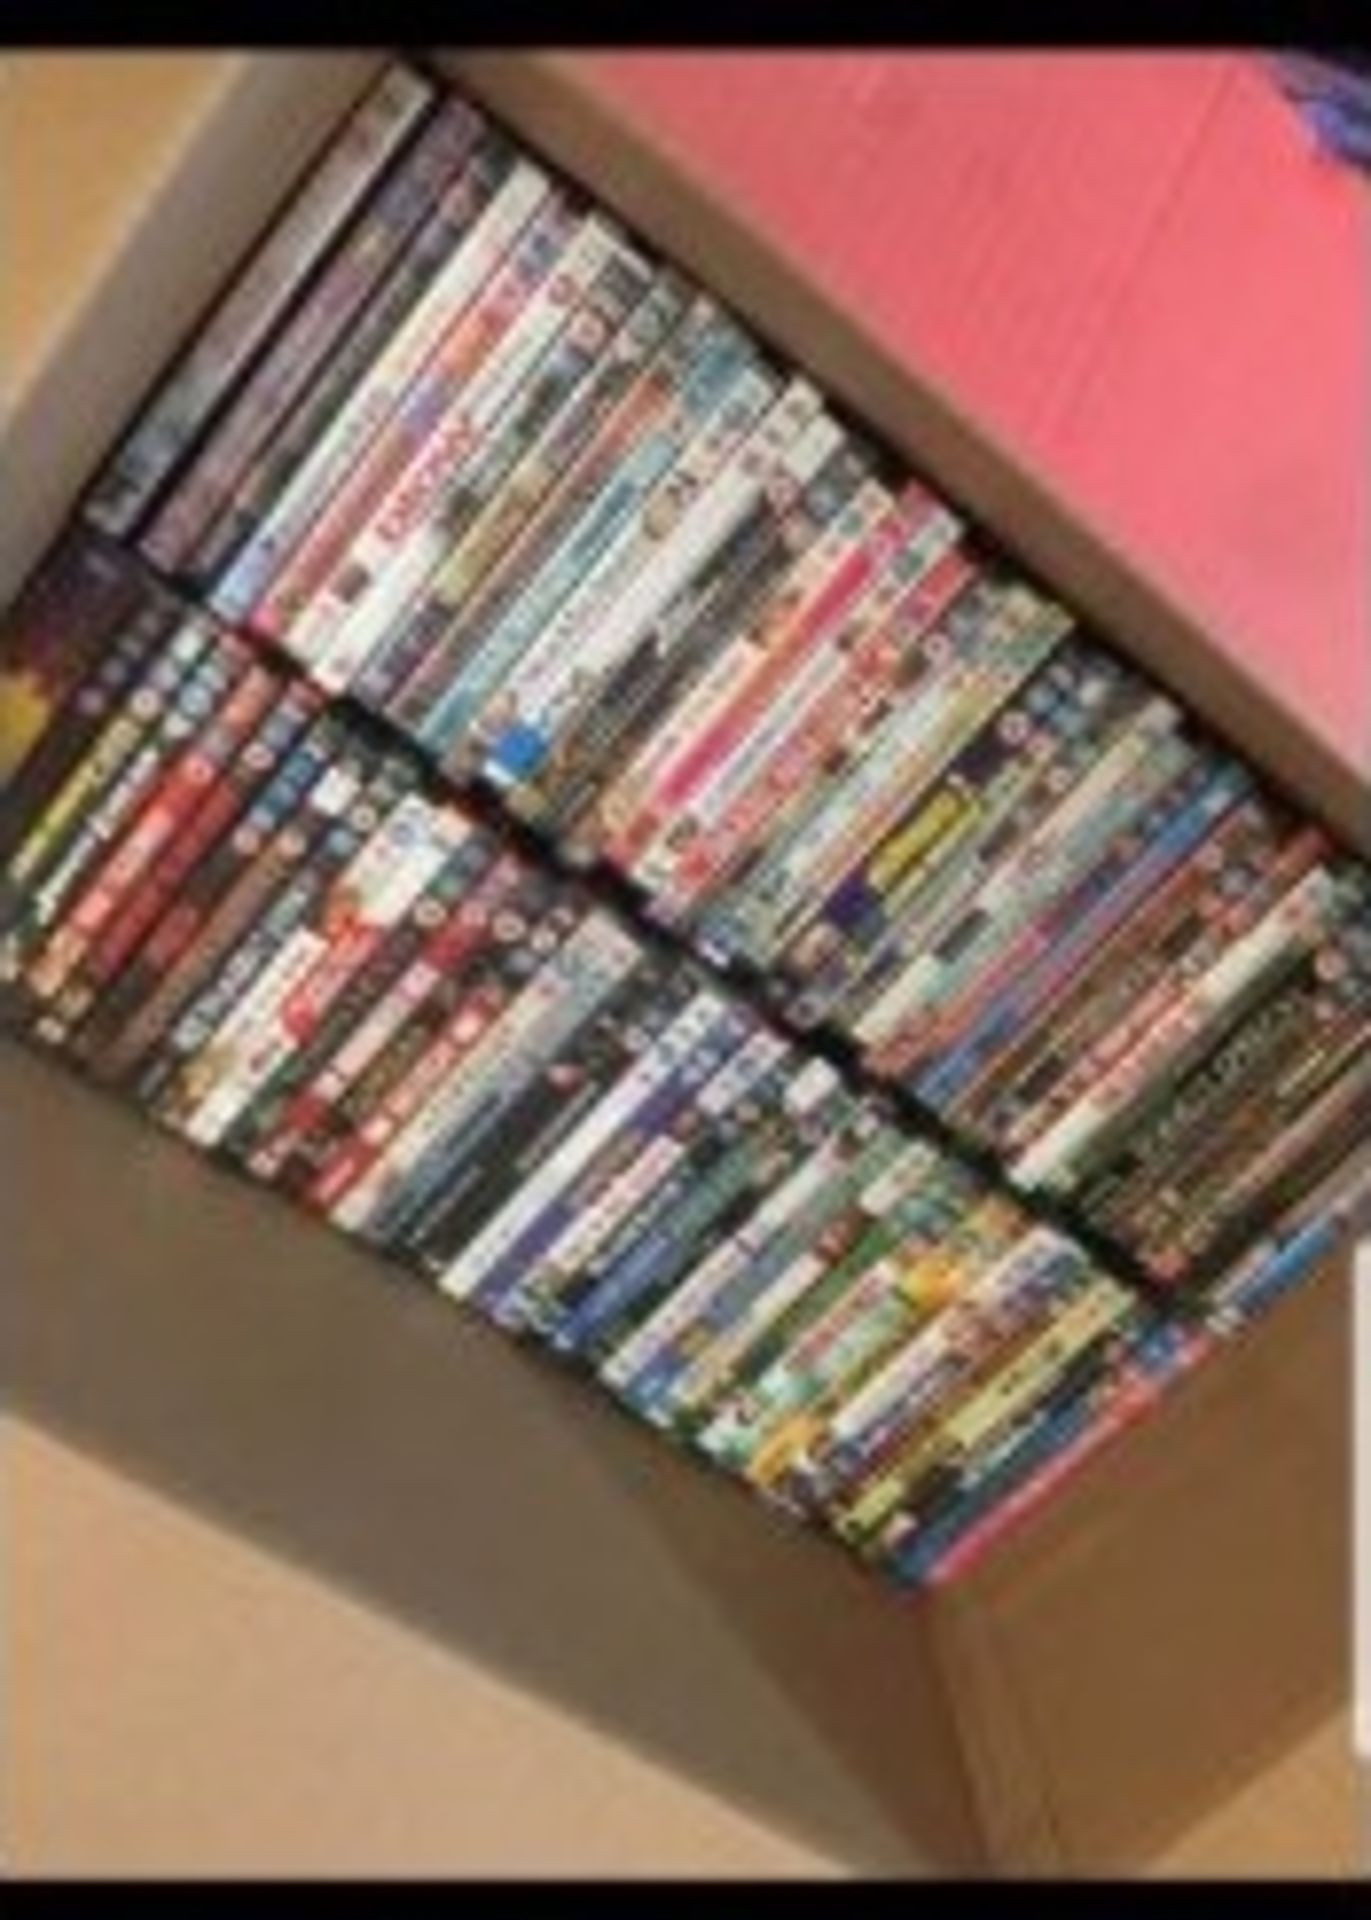 1000 New Packed and Sealed DVDs (various genres)